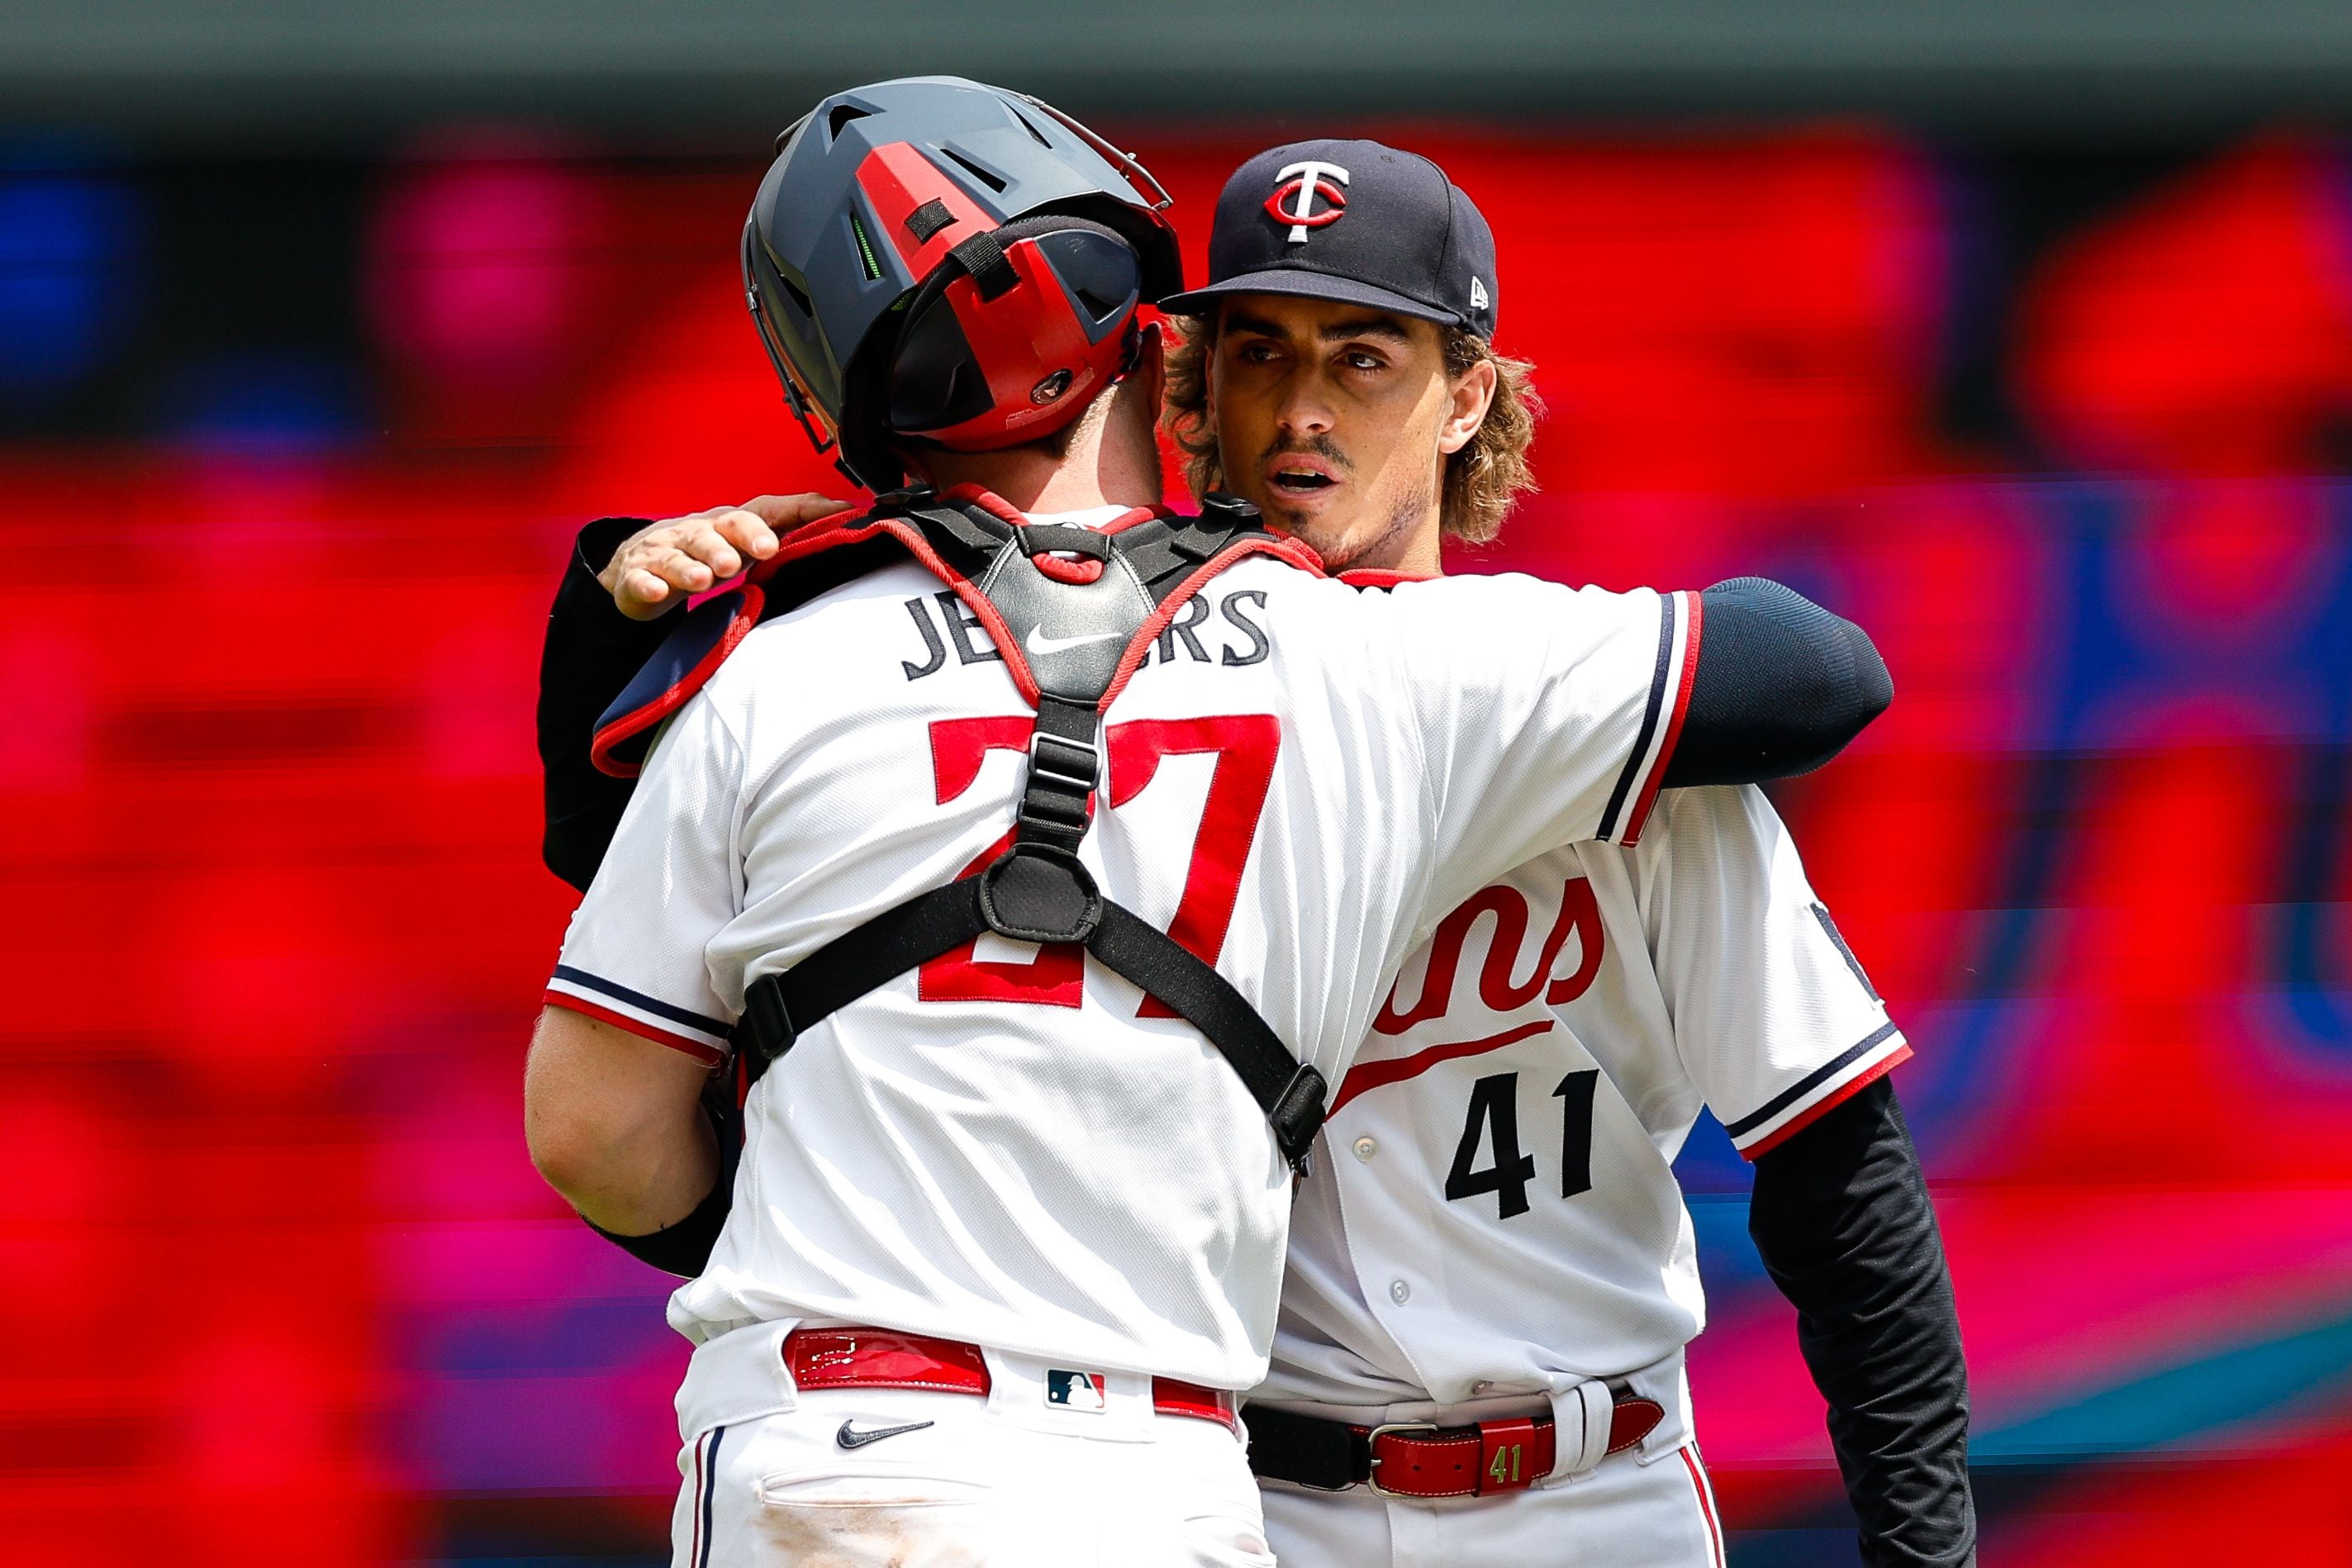 Ryan pitches Twins first complete-game shutout in 5 years, 6-0 win